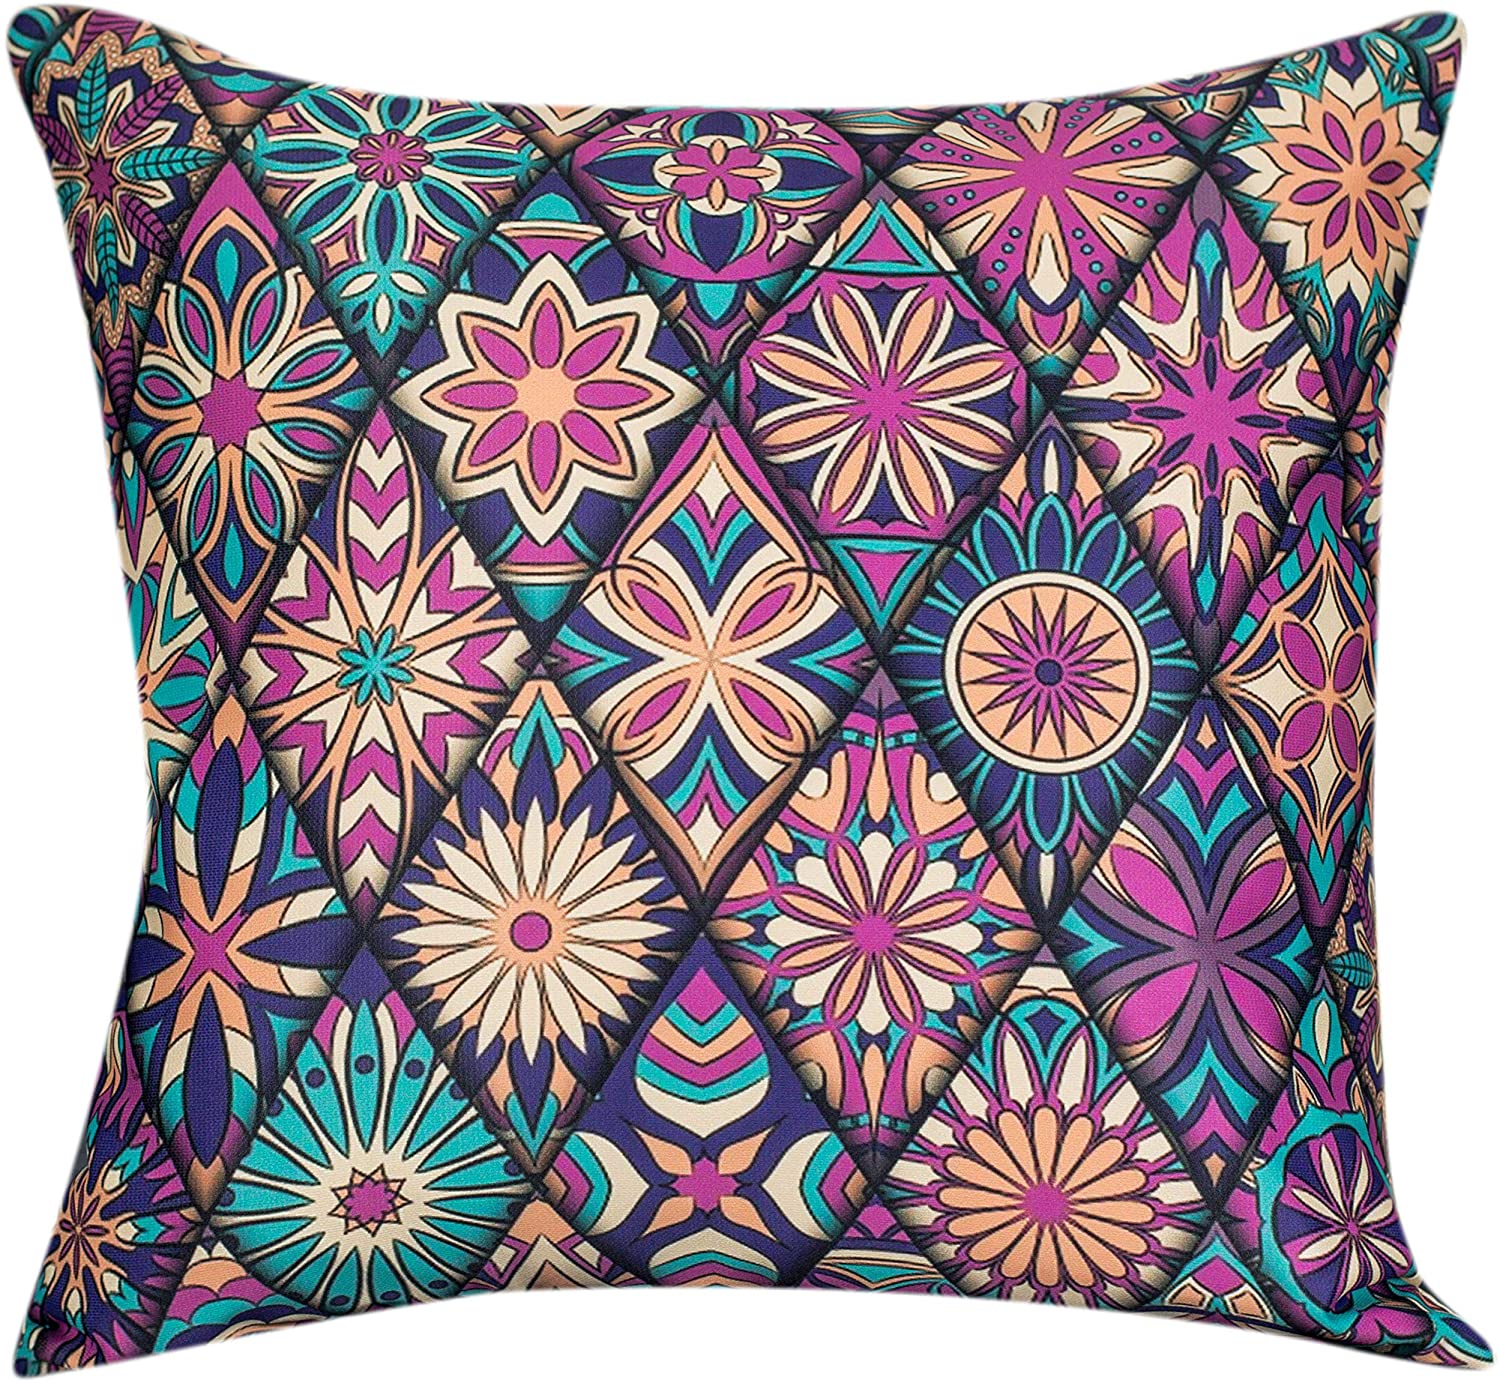 Jaipur Rugs Jaipur's Geometric Pattern Blue/Pink Cotton and Linen Polly Fill  Pillow - (14x20)